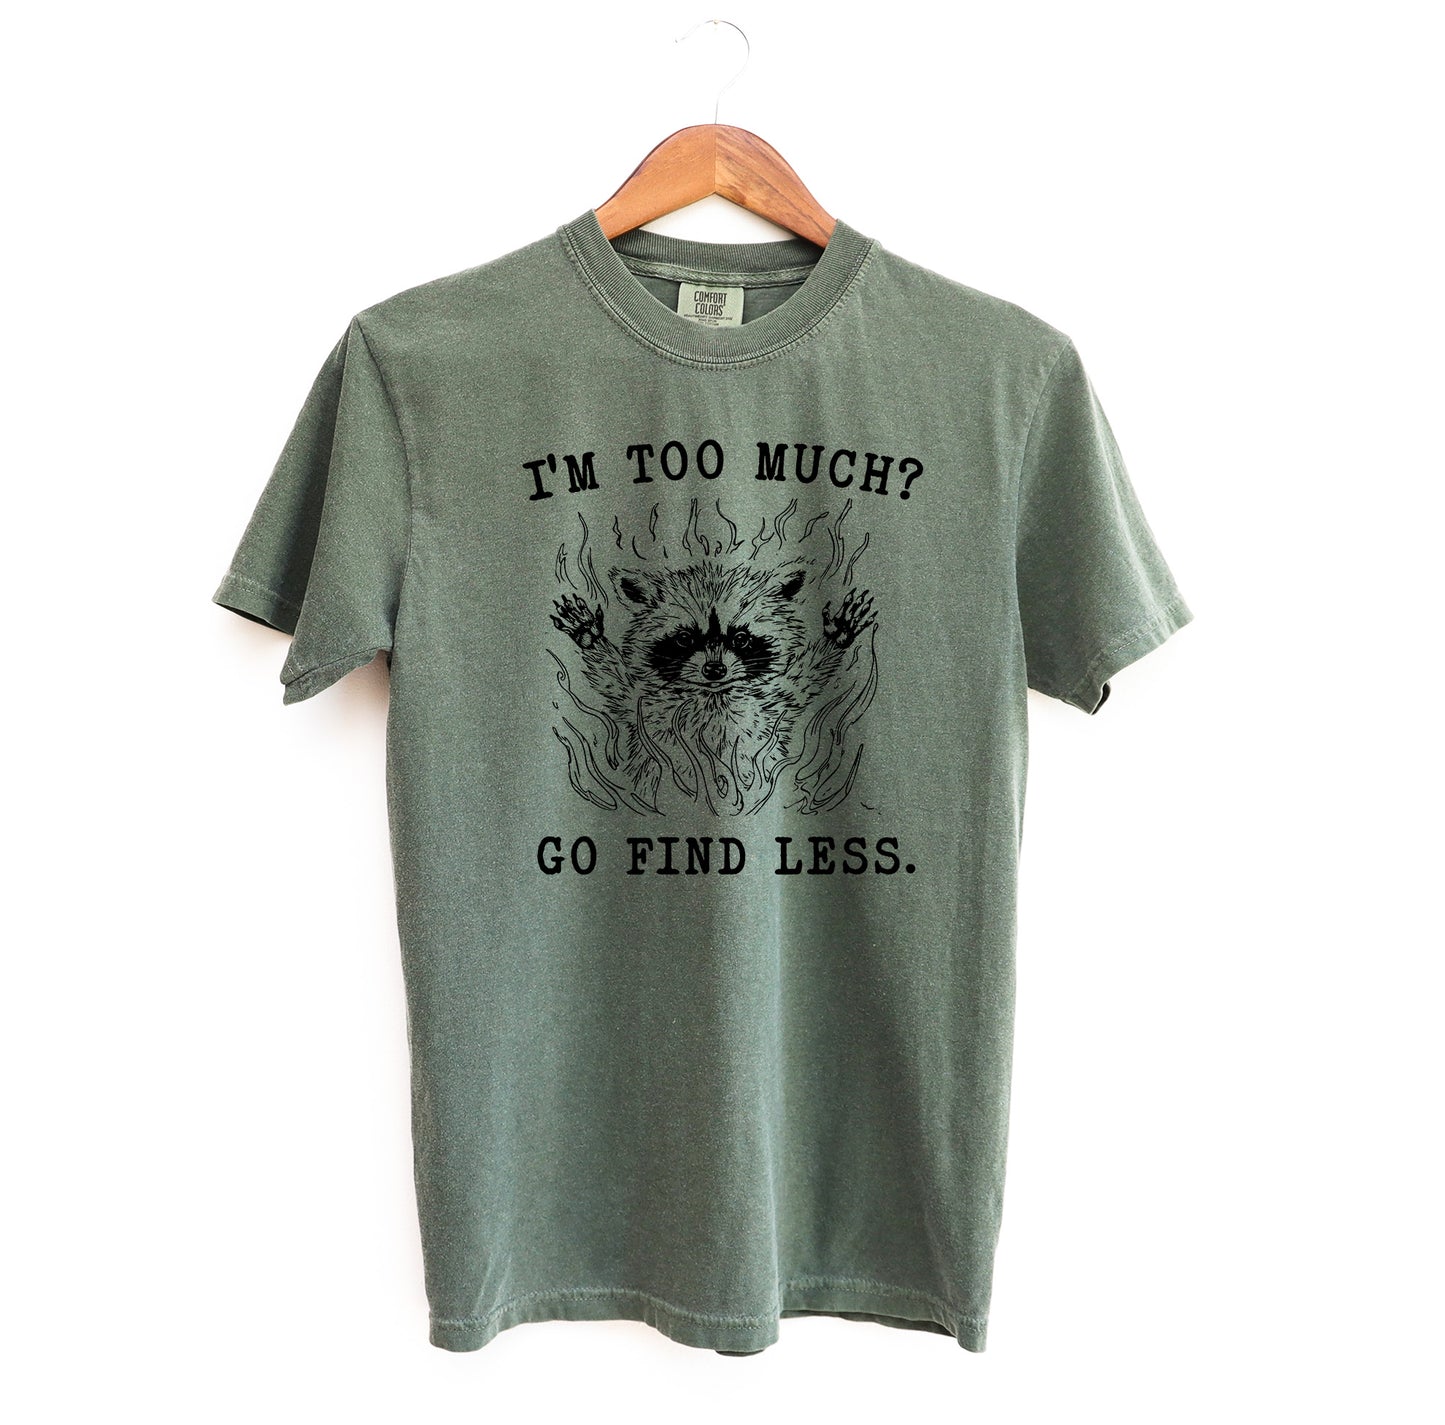 I'm too Much? Go Find Less T-Shirt